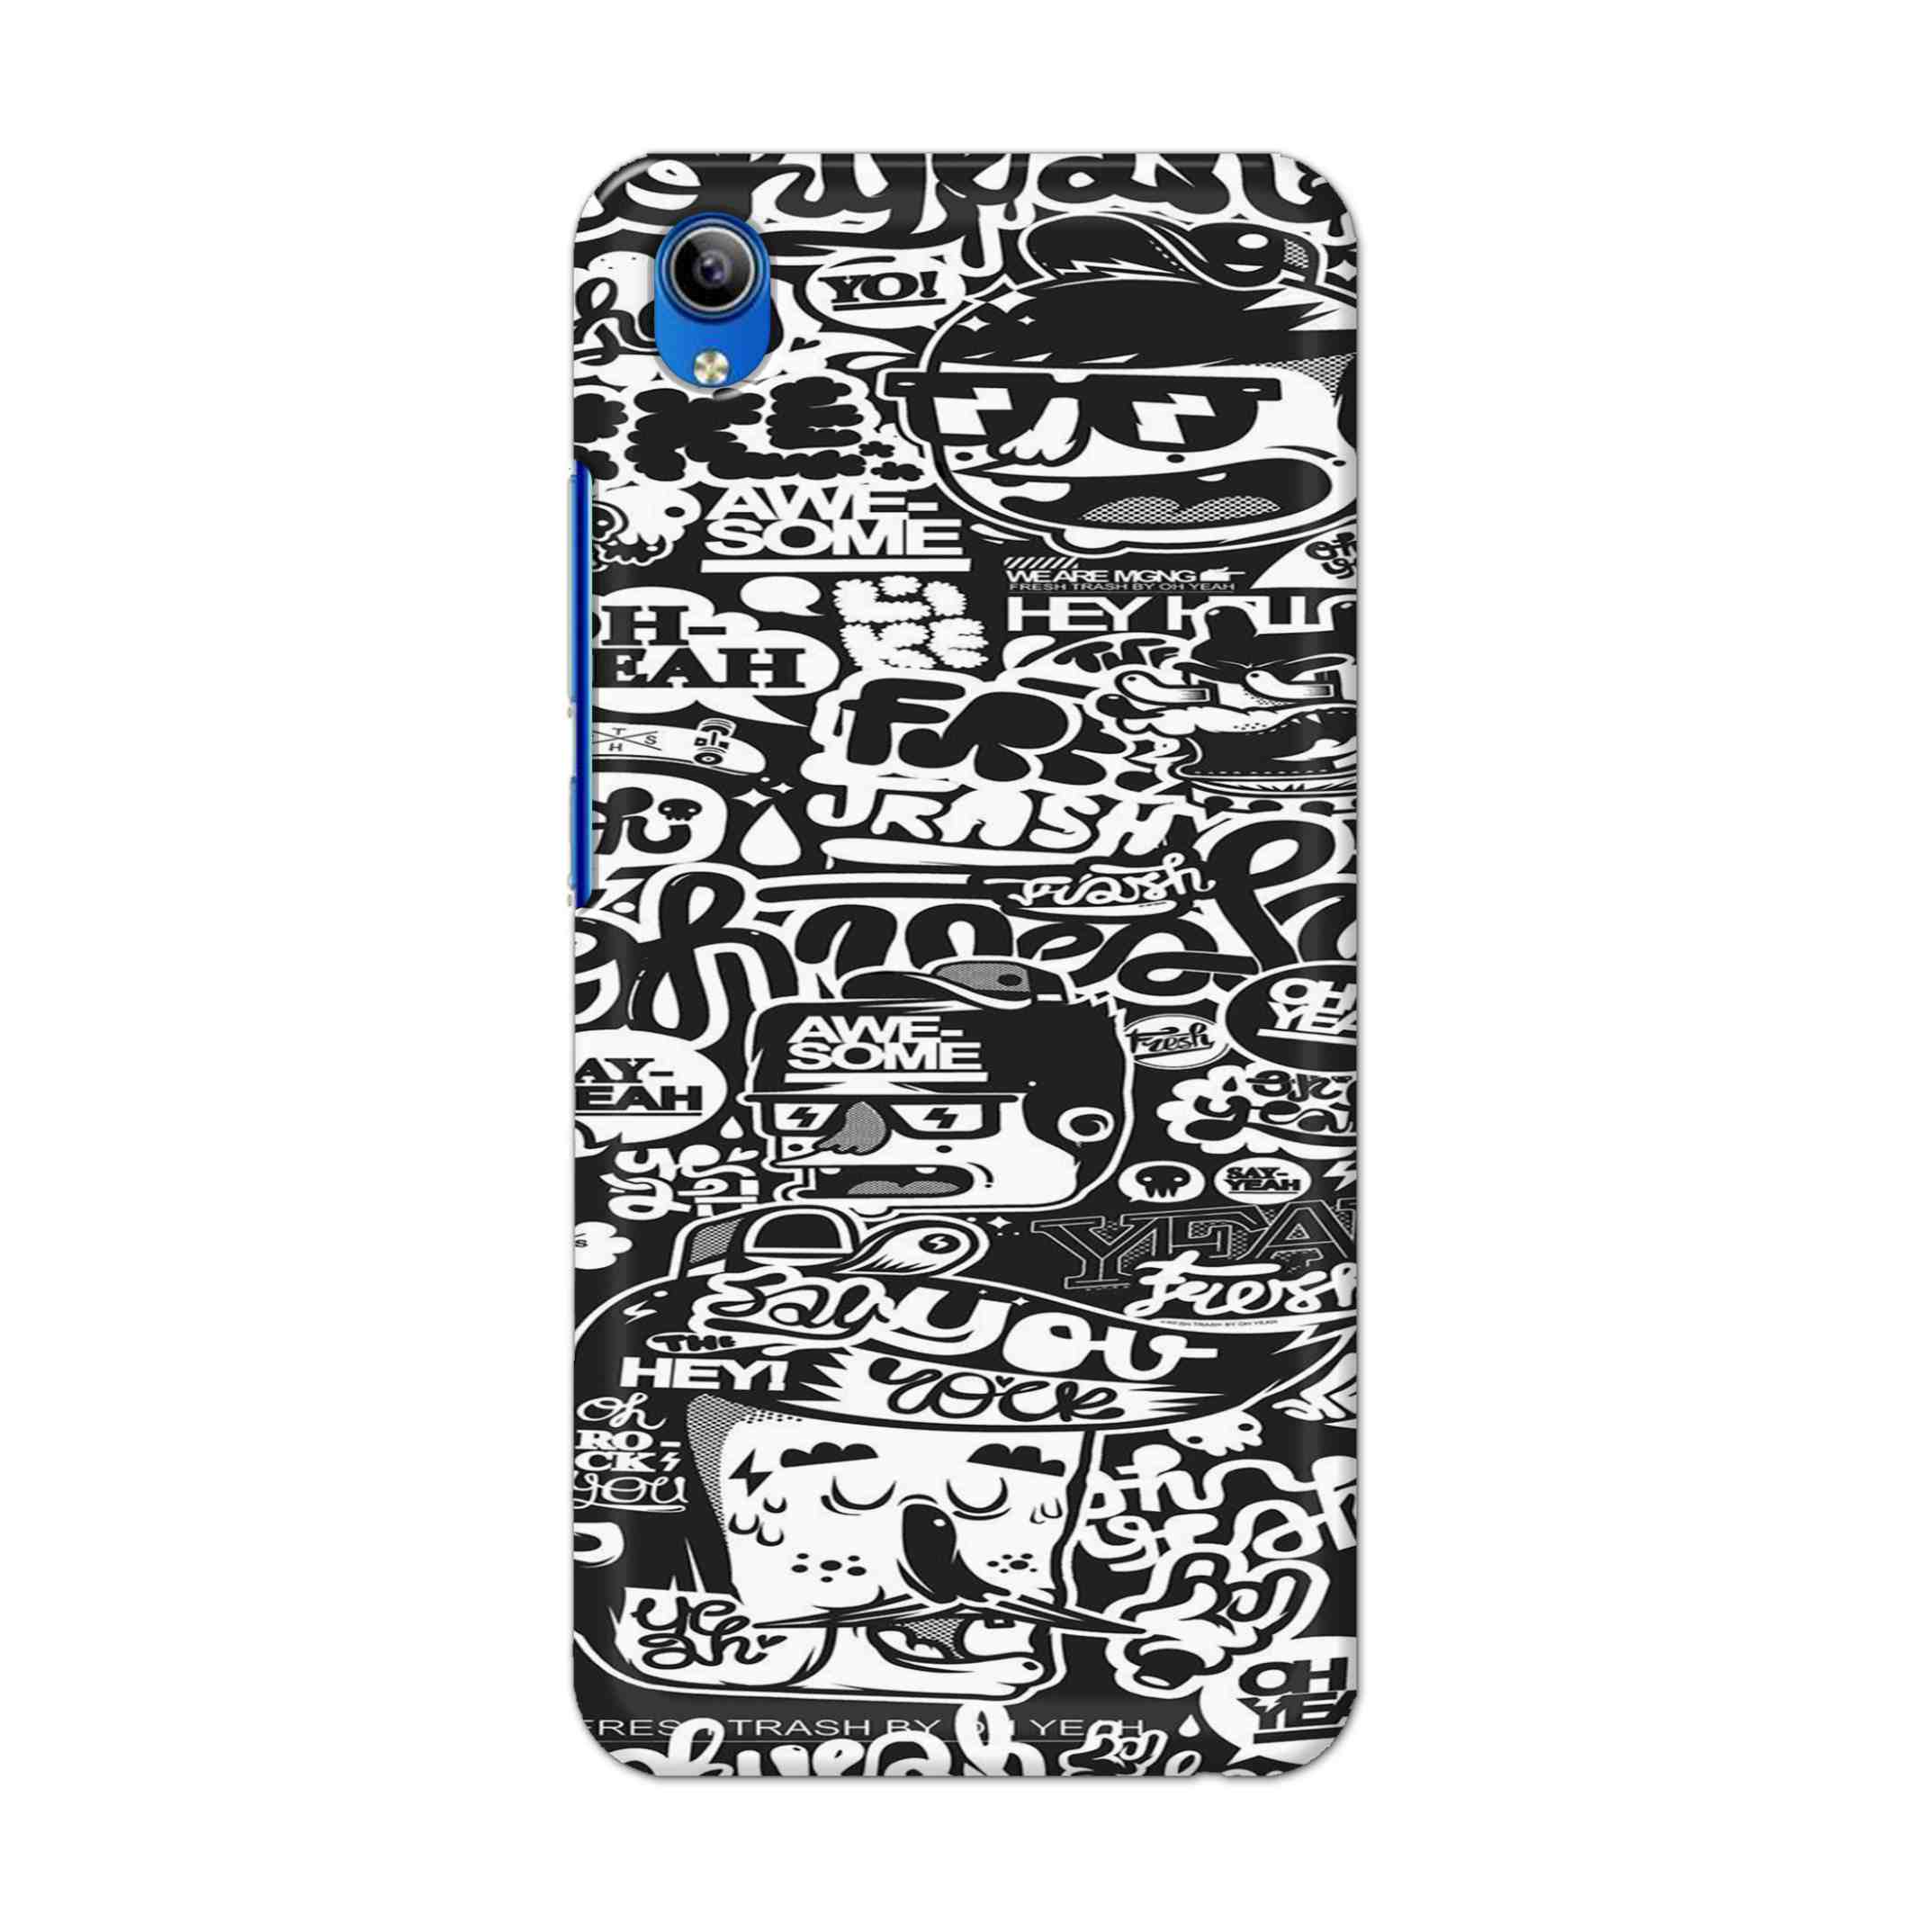 Buy Awesome Hard Back Mobile Phone Case Cover For Vivo Y91i Online